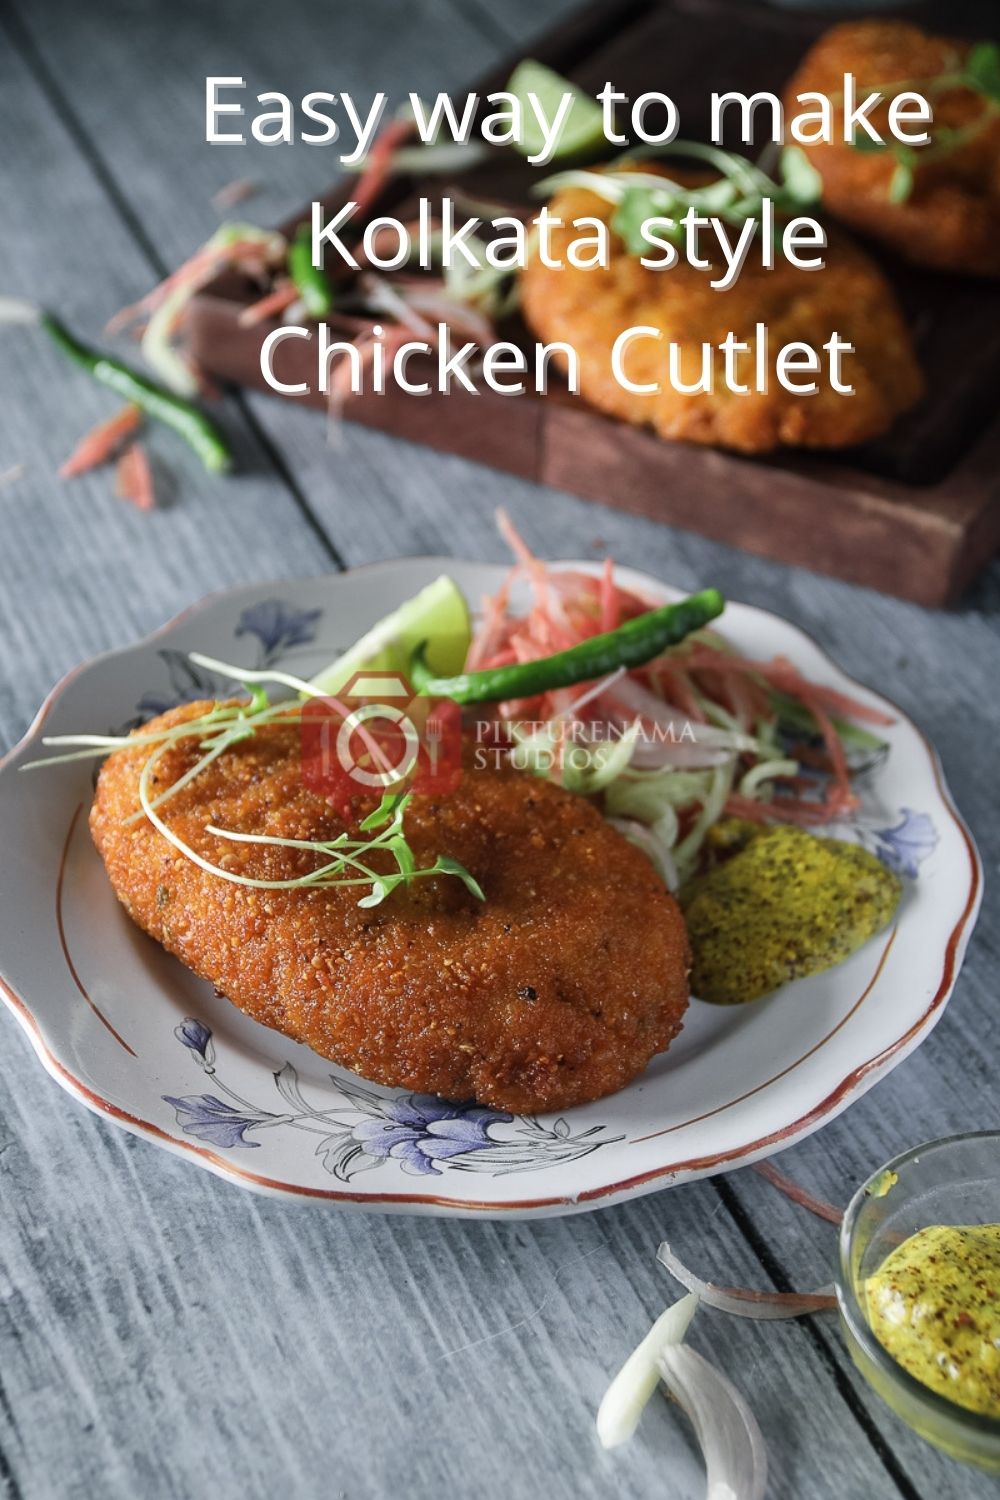 Easy way to make chicken cutlet for pinterest - 1